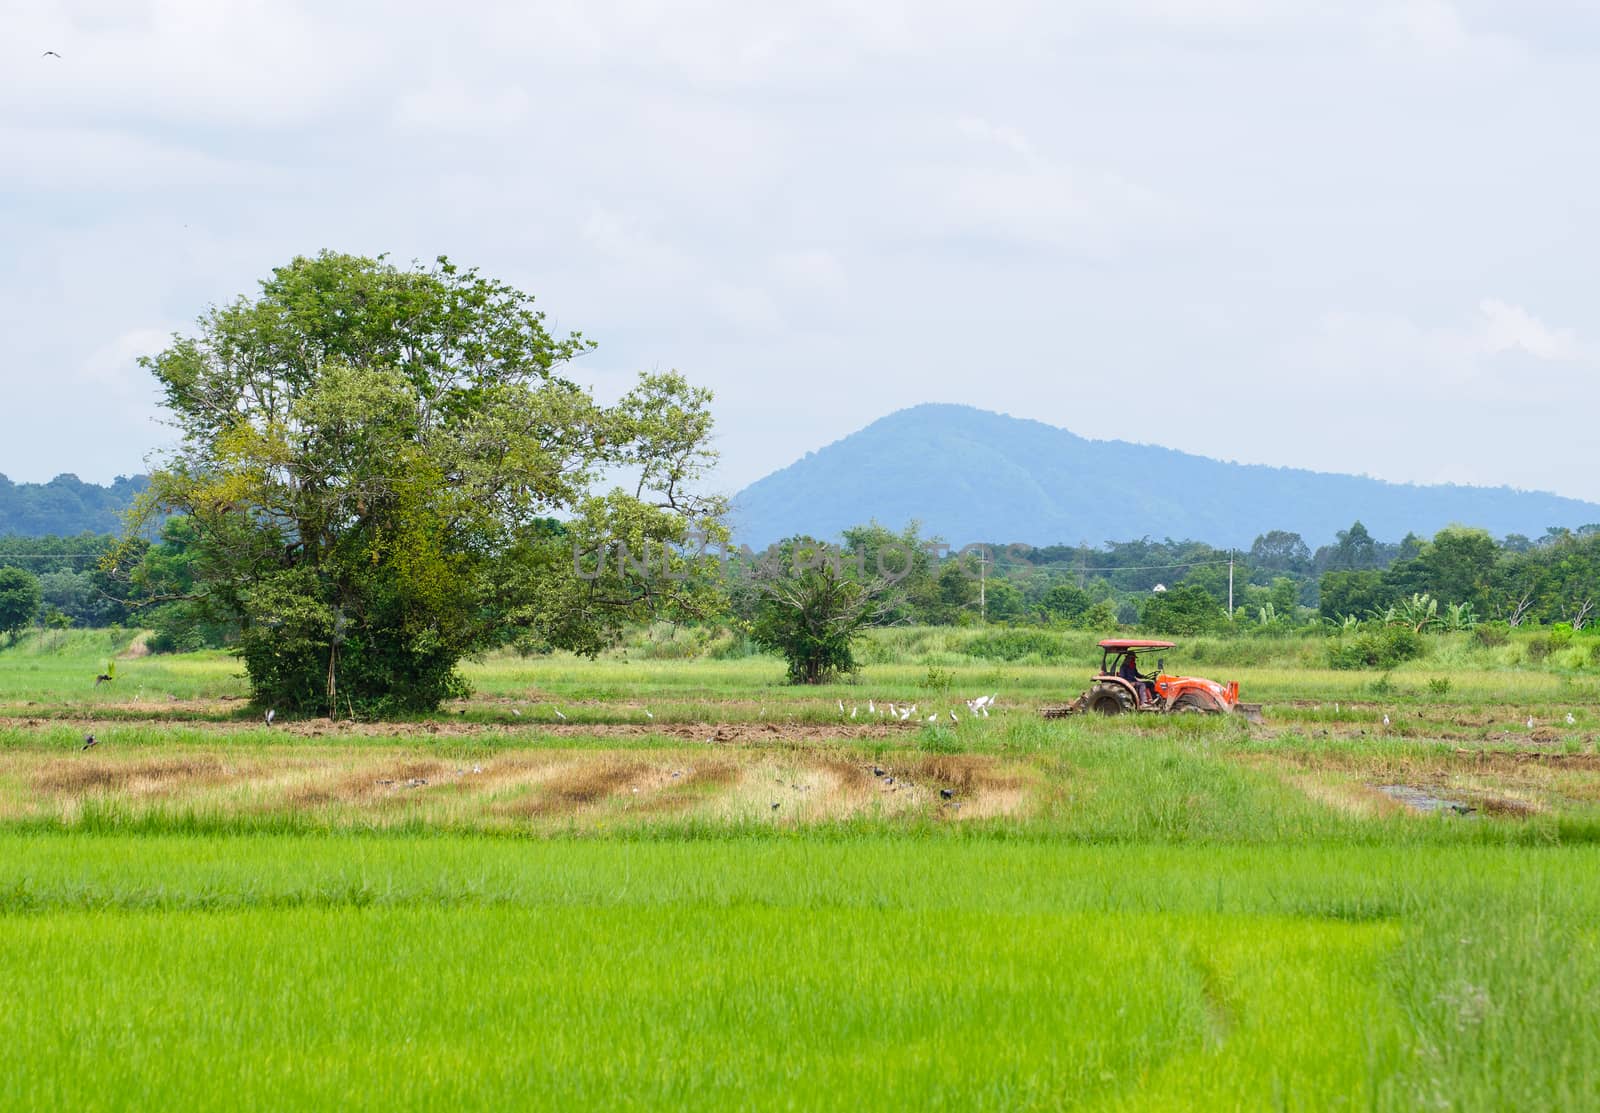 Farm worker preparing the ground for 
the growth of rice with tractor, Thailand